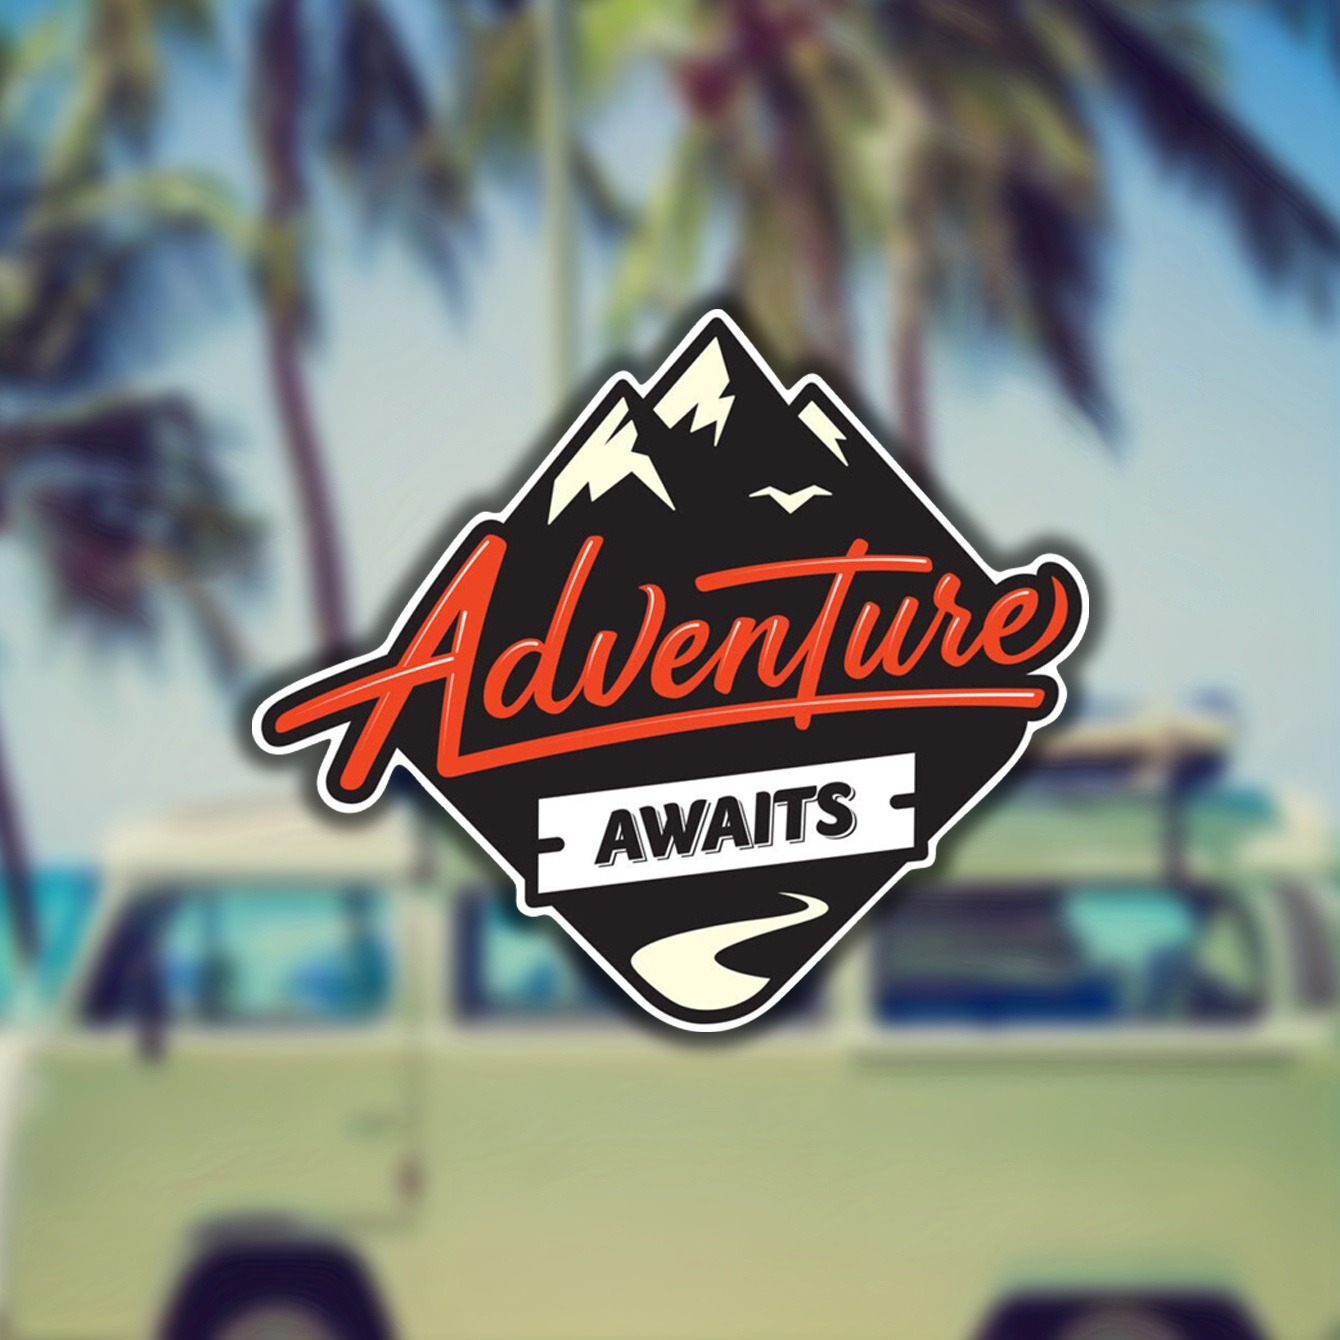 

1pc Adventure Awaits Sticker - Waterproof - Camping Hiking In The Mountains - Car Bumper Sticker